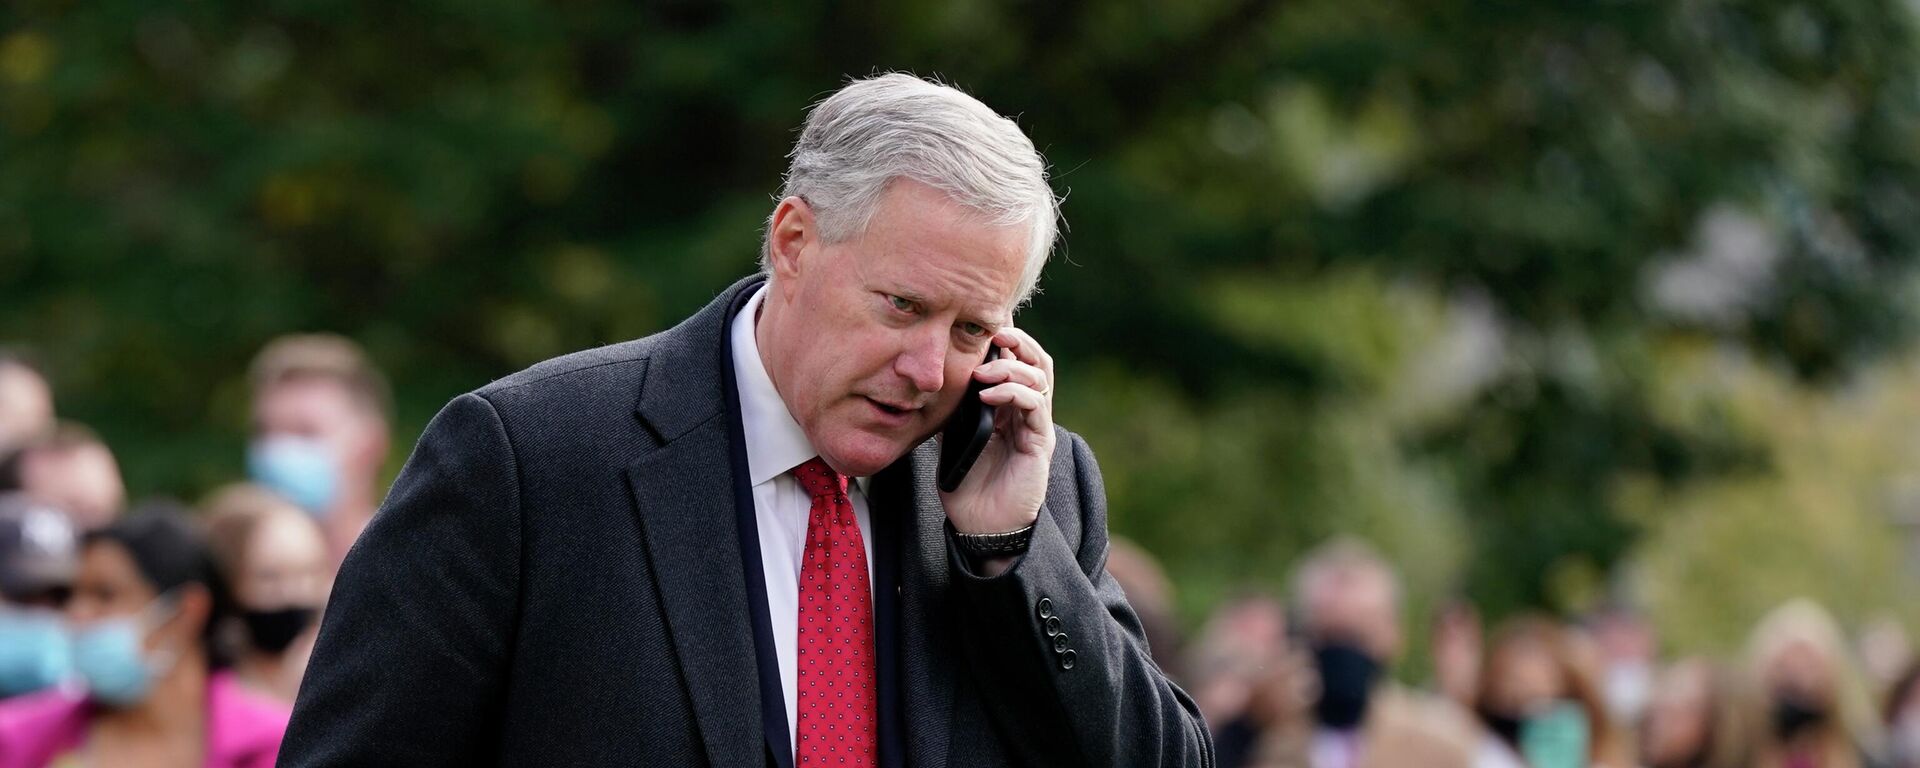 White House chief of staff Mark Meadows speaks on a phone on the South Lawn of the White House in Washington, on Oct. 30, 2020. The House committee investigating the Jan. 6 Capitol insurrection has issued almost three dozen subpoenas as it aggressively seeks information about the origins of the attack and what former President Donald Trump did — or didn’t do — to stop it. The panel is exploring several paths simultaneously. - Sputnik International, 1920, 23.04.2022